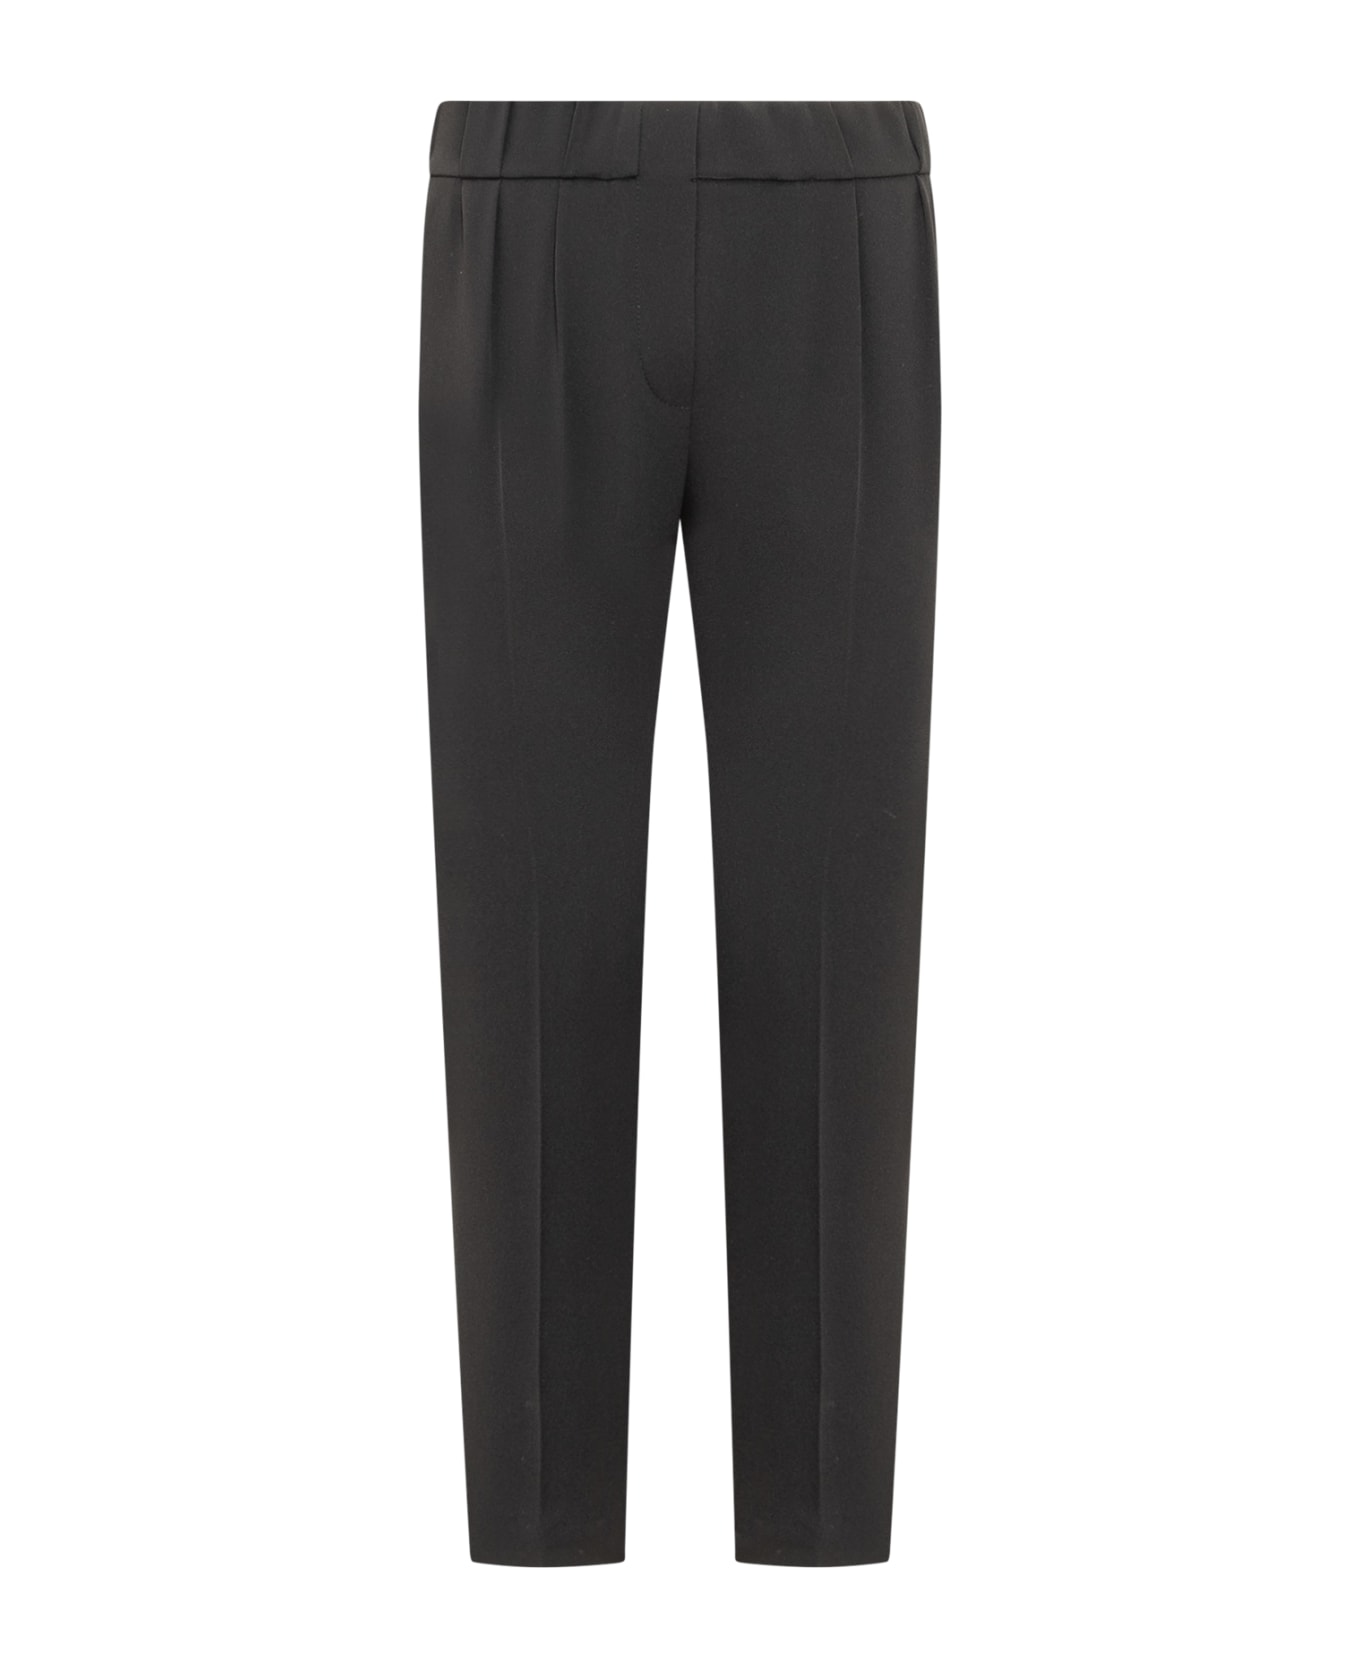 Brunello Cucinelli Cady Cropped Trousers - Black ボトムス